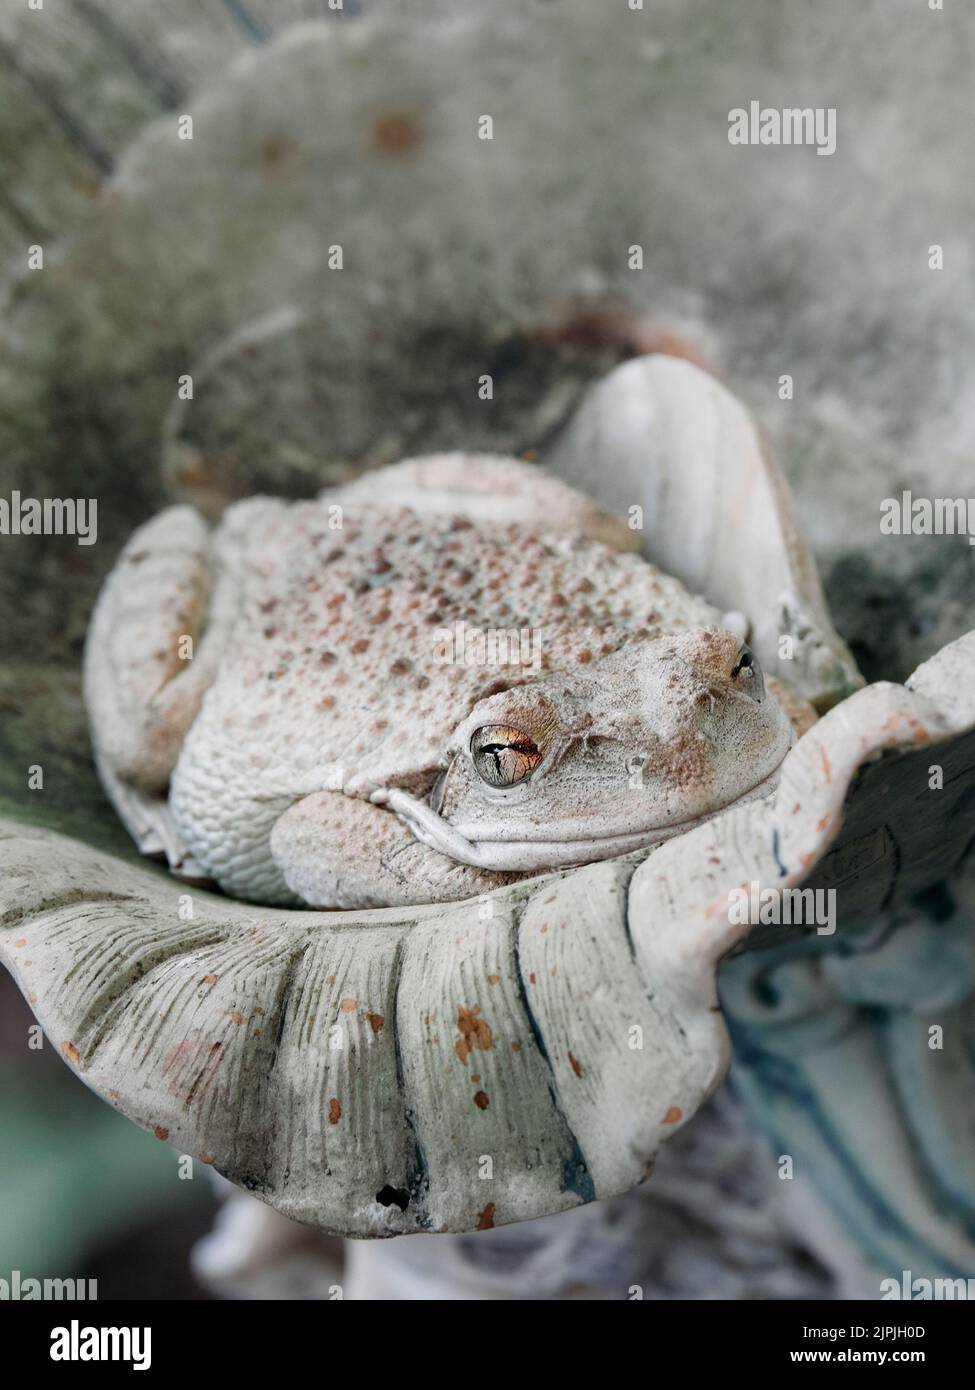 Grey anaxyrus fowleri or Fowler's toad found resting in a small garden fountain feature in central Alabama, USA. Stock Photo